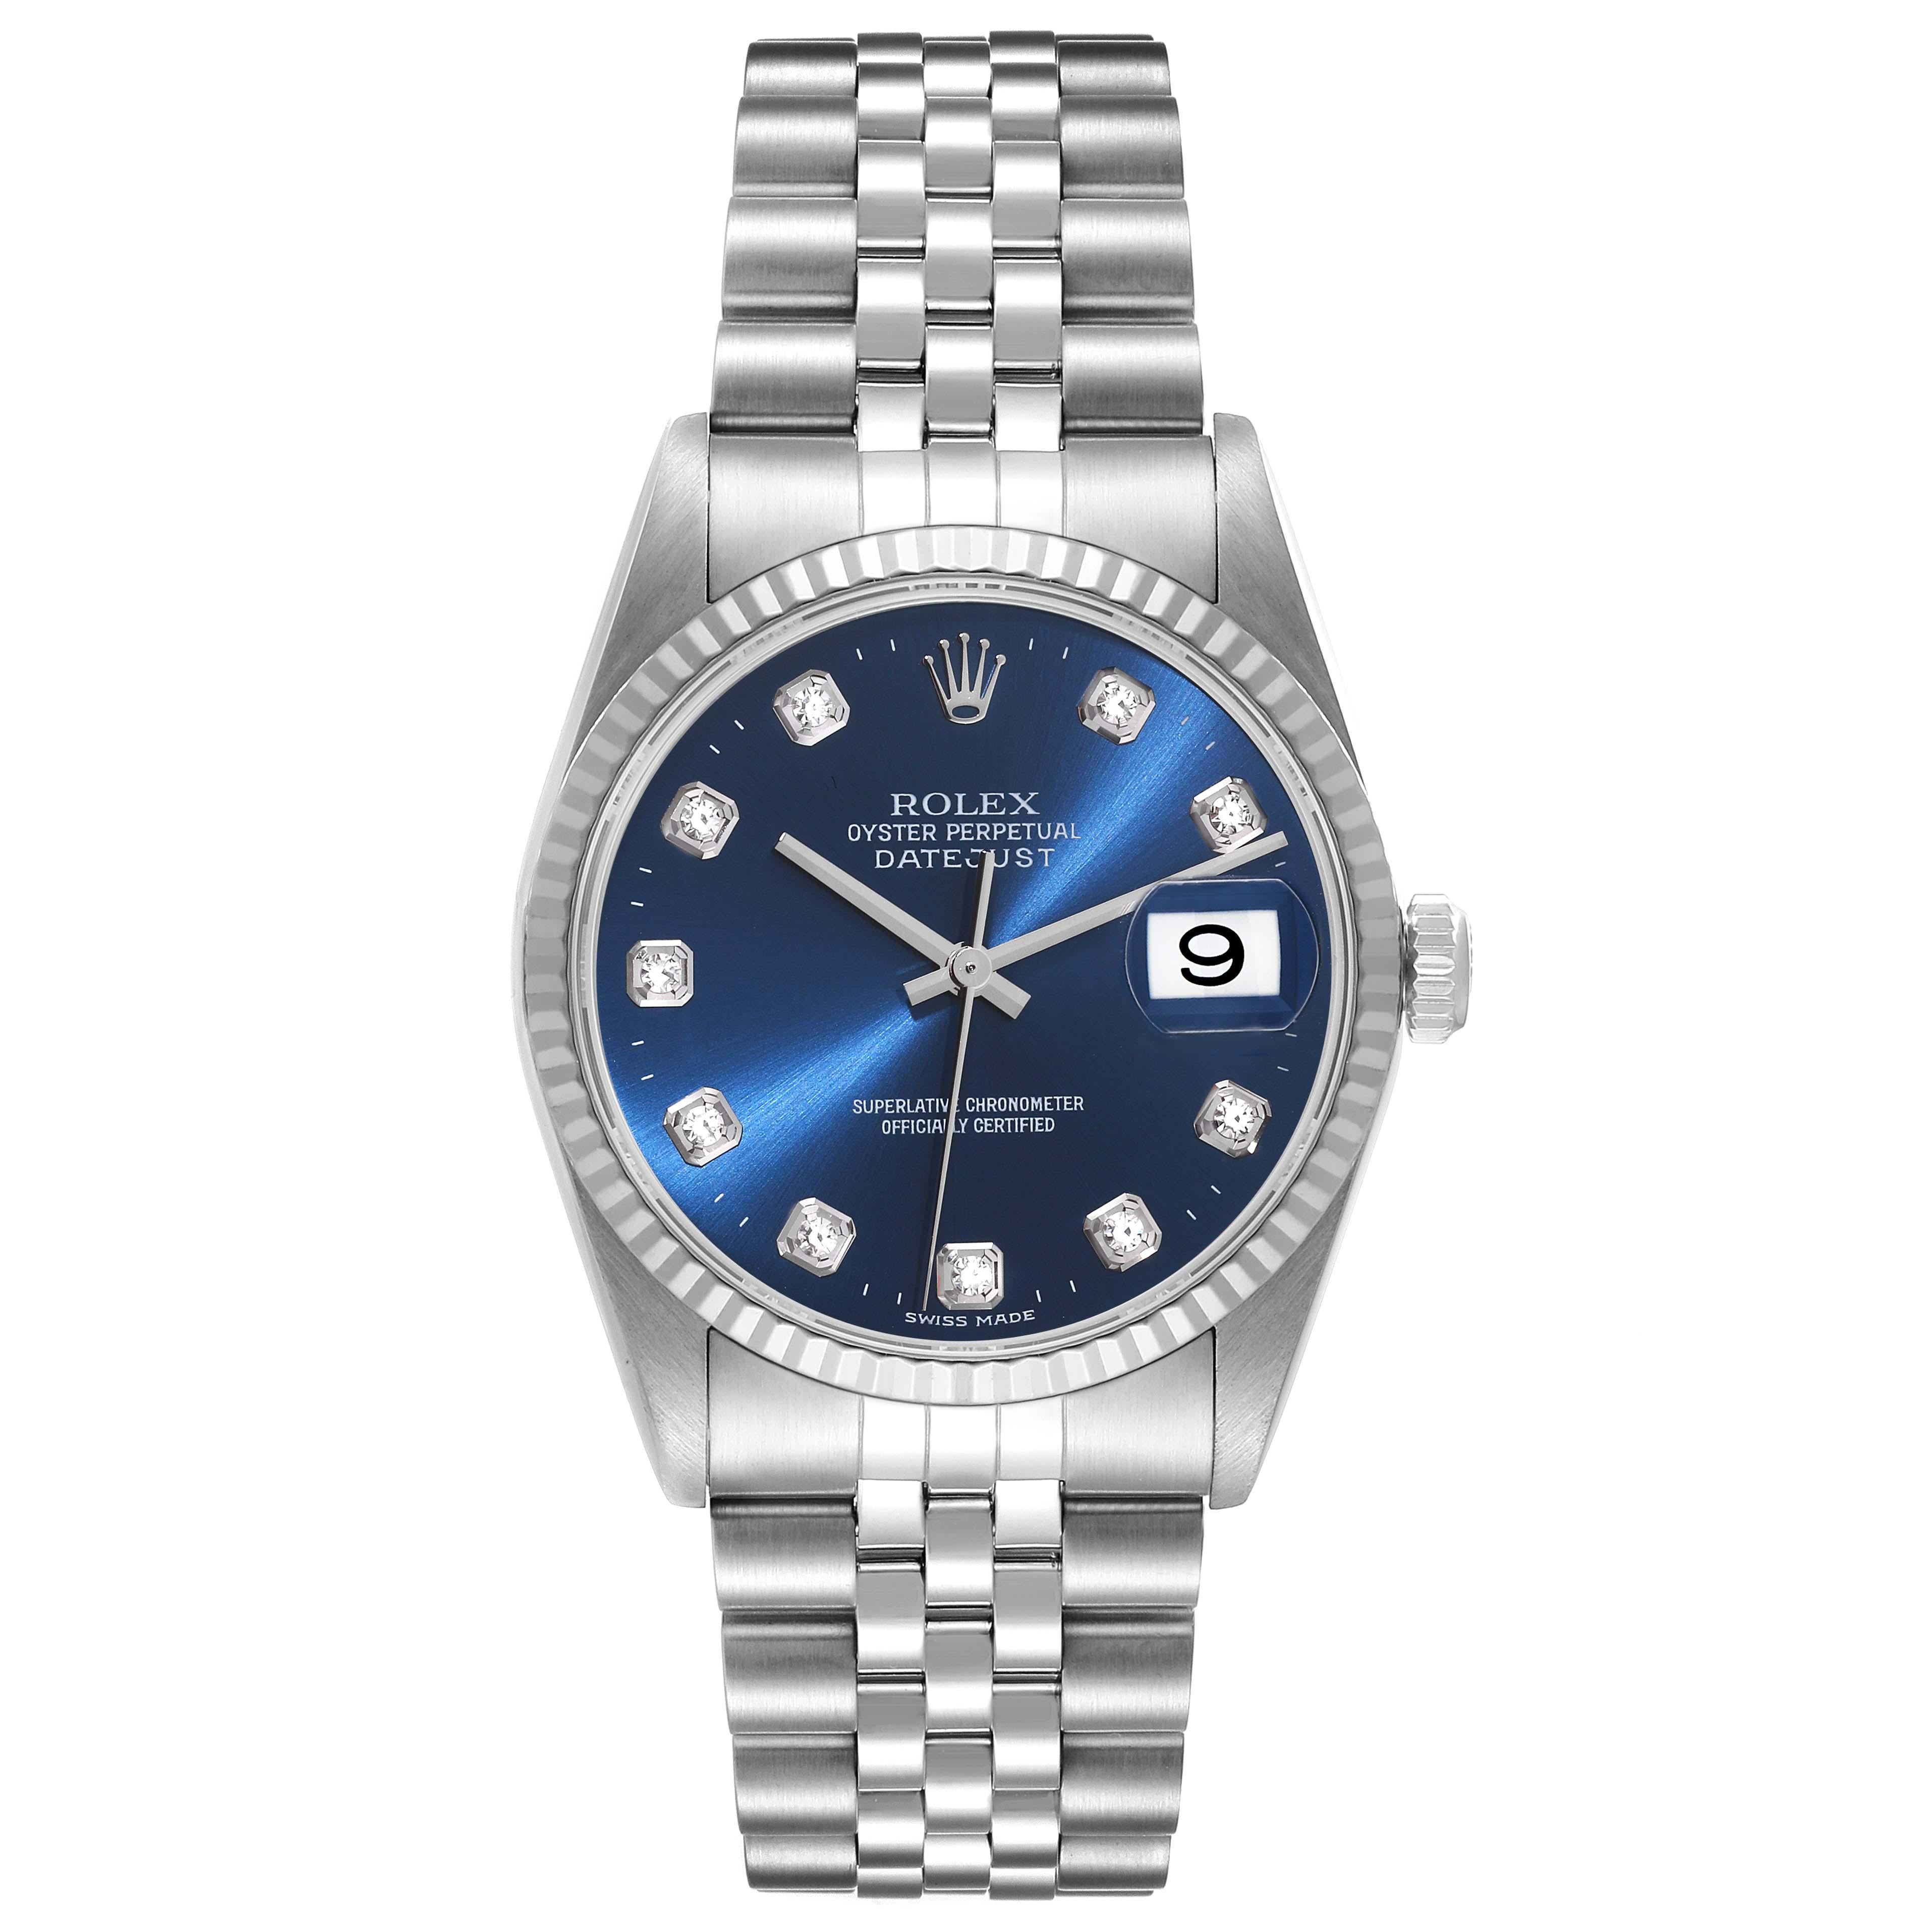 Rolex Datejust Blue Diamond Dial Steel White Gold Mens Watch 16234 Box Papers. Officially certified chronometer automatic self-winding movement. Stainless steel oyster case 36.0 mm in diameter. Rolex logo on a crown. 18k white gold fluted bezel.